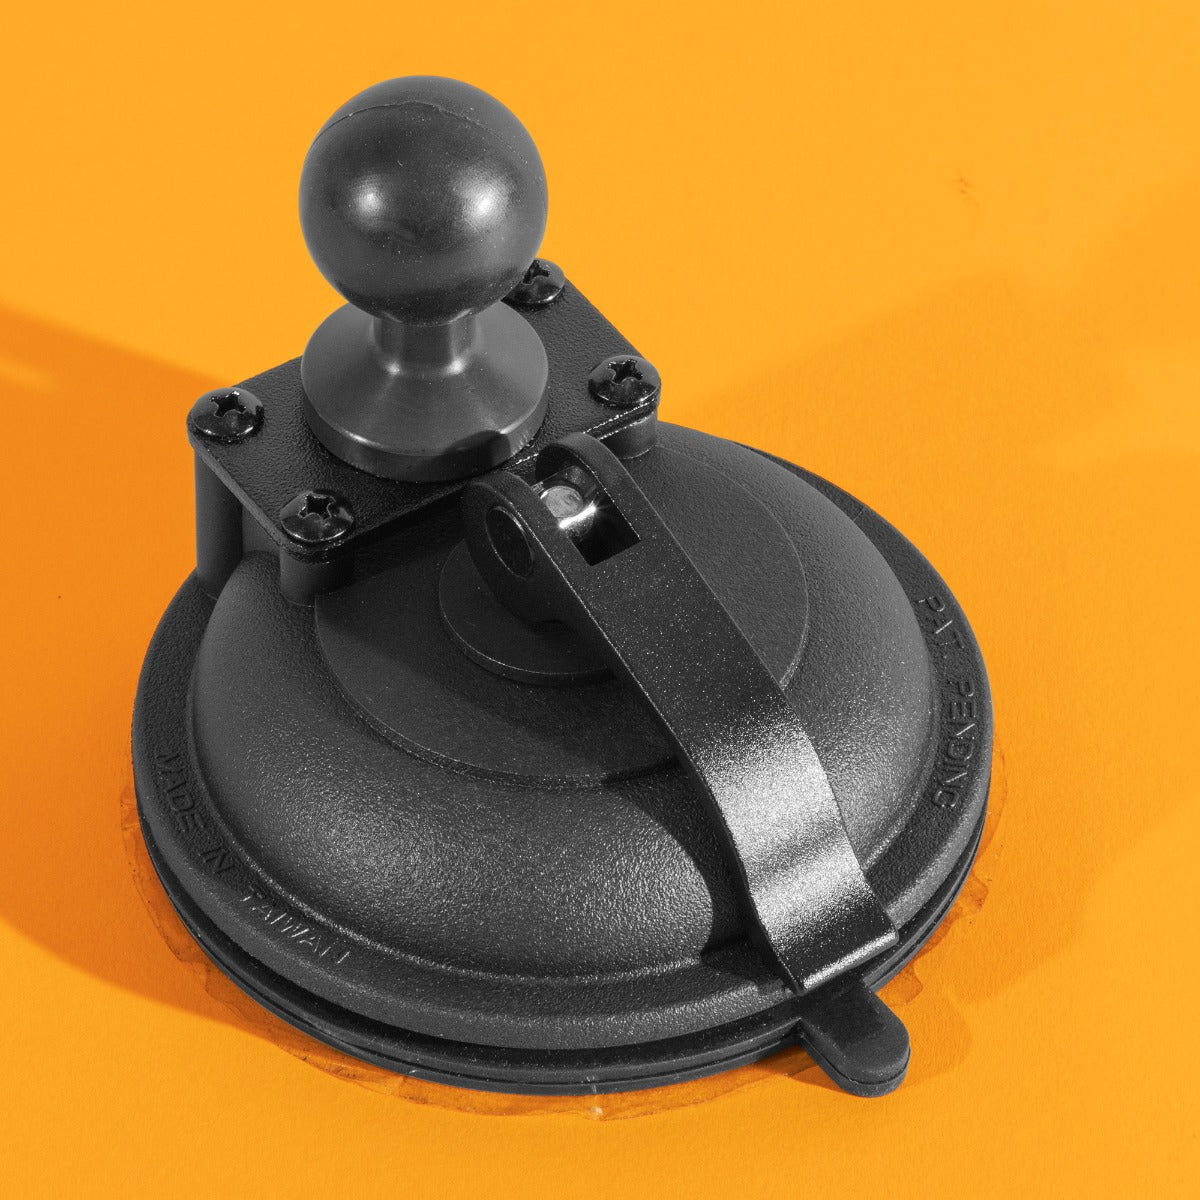 iBOLT™ 25mm / 1 inch Heavy Duty Metal Ball Suction Cup Base